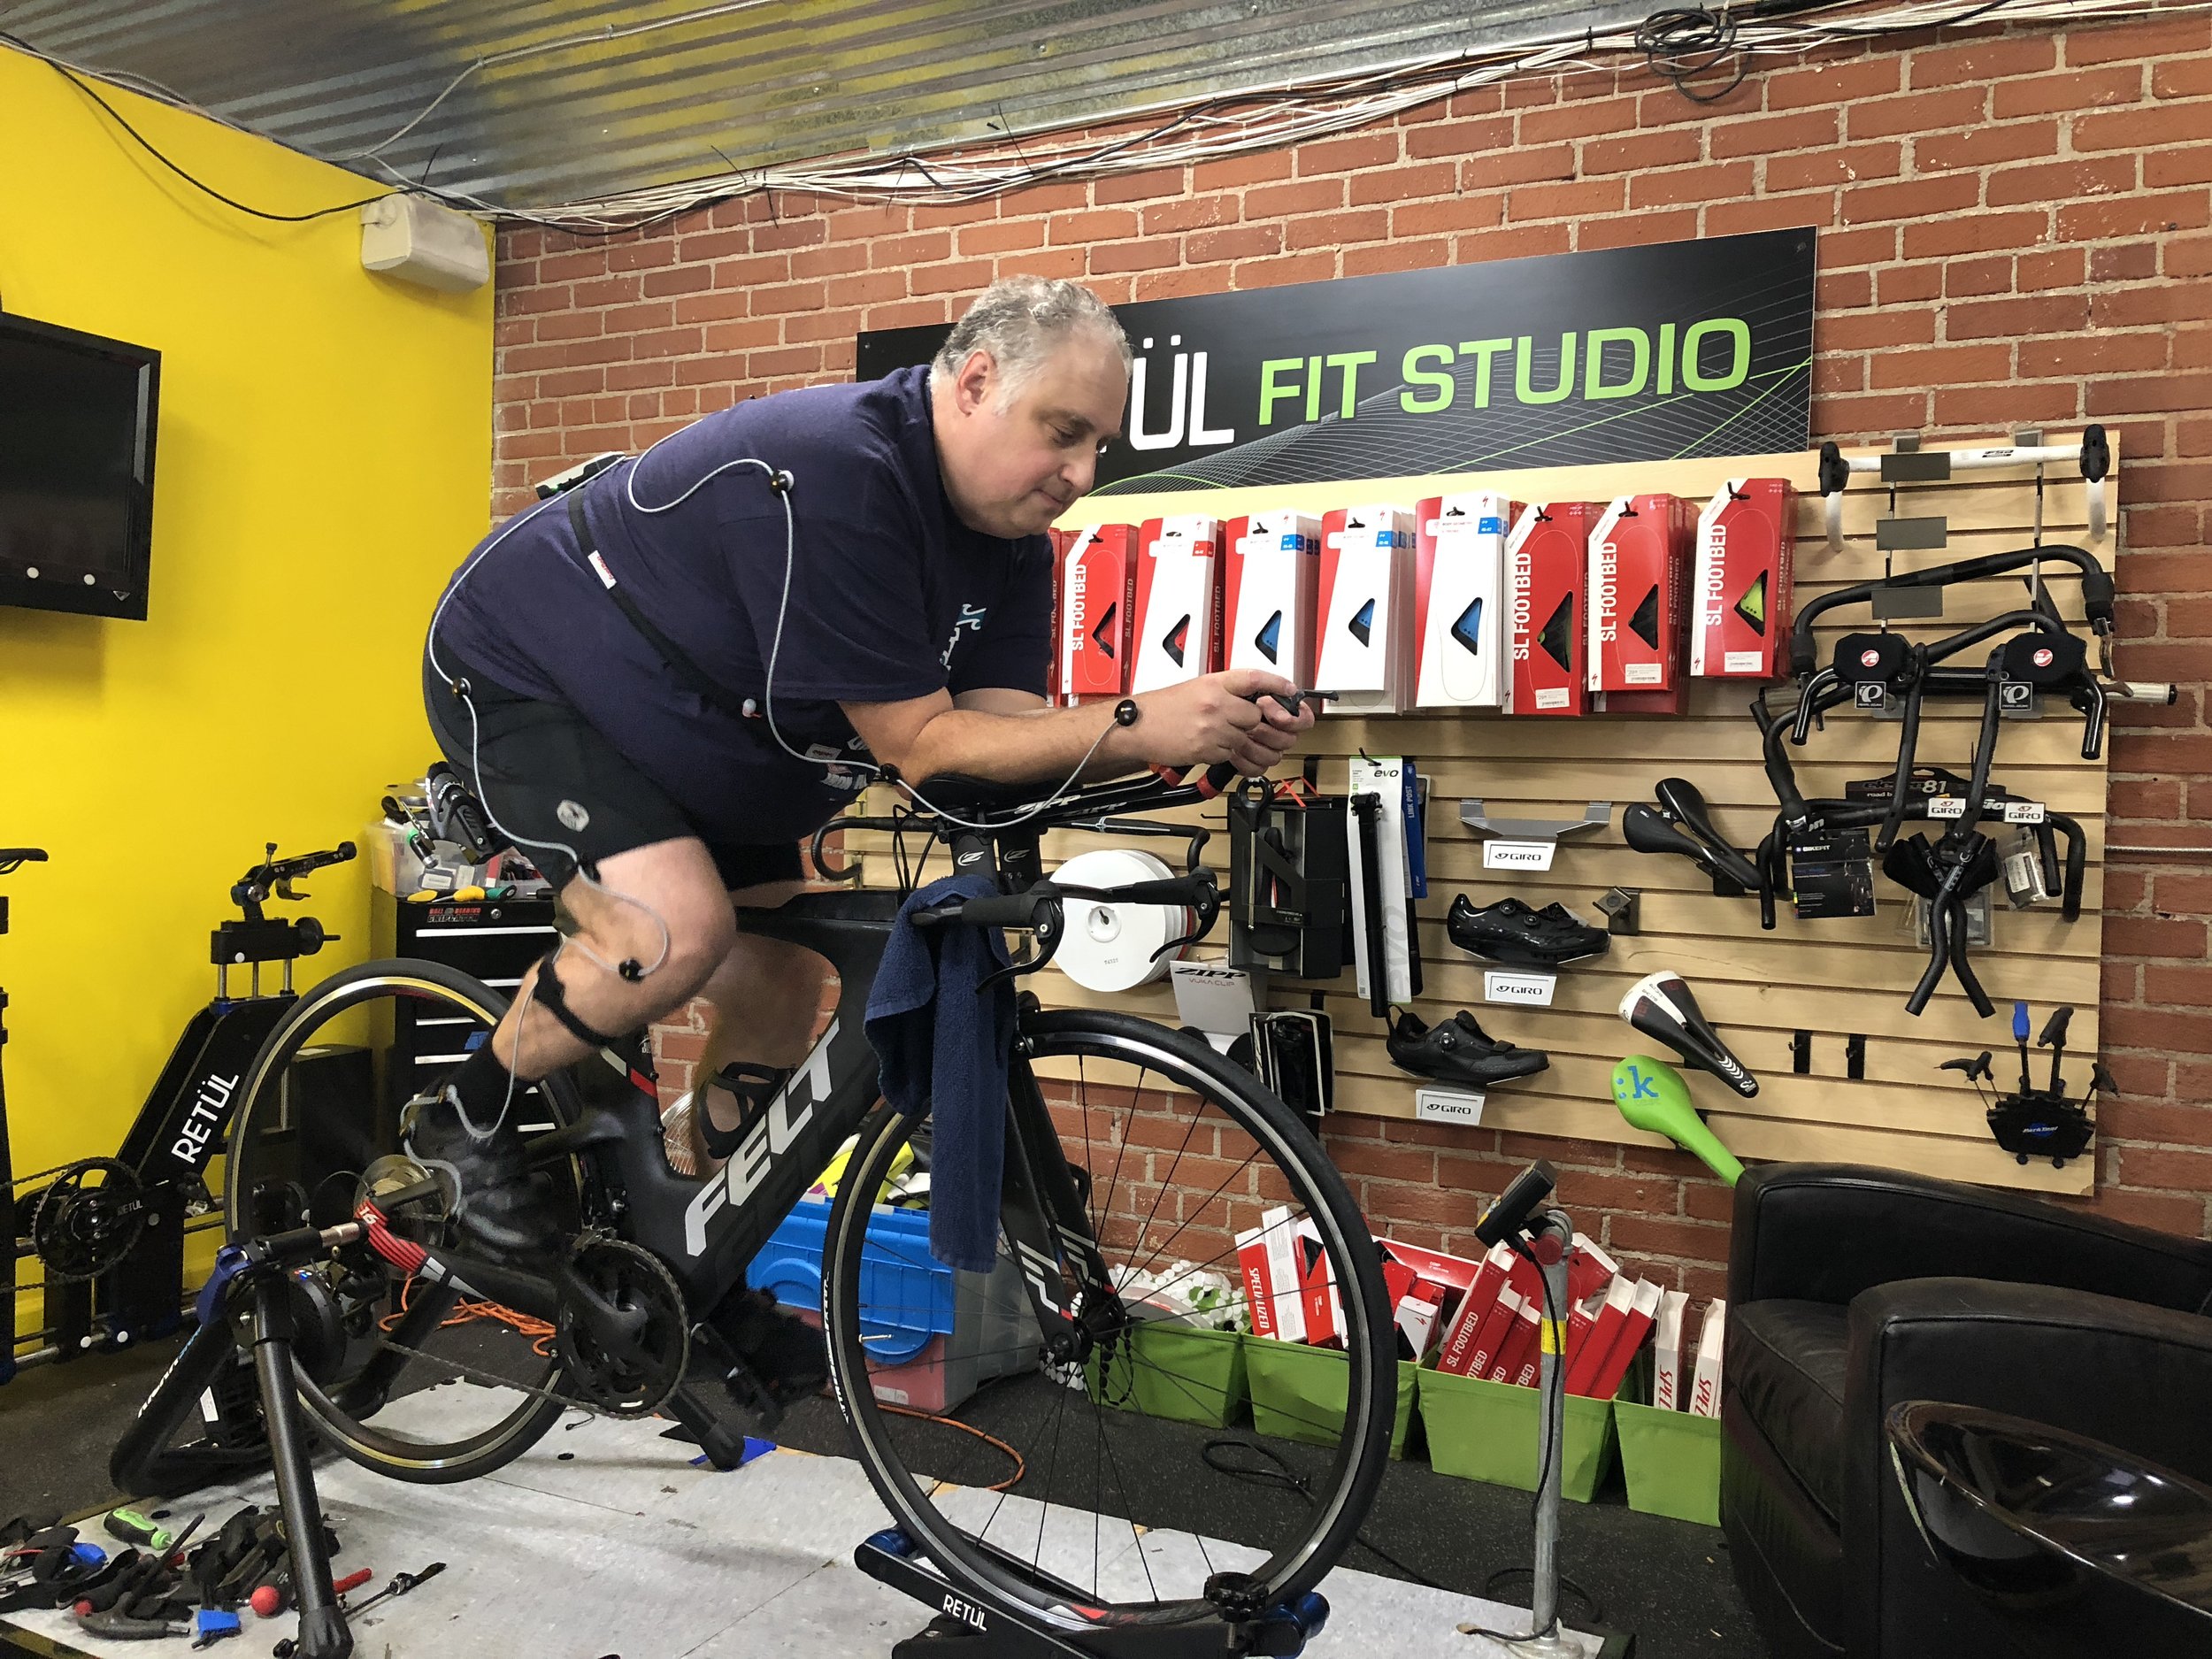 On the Retul fitting platform at Uptown Cycles